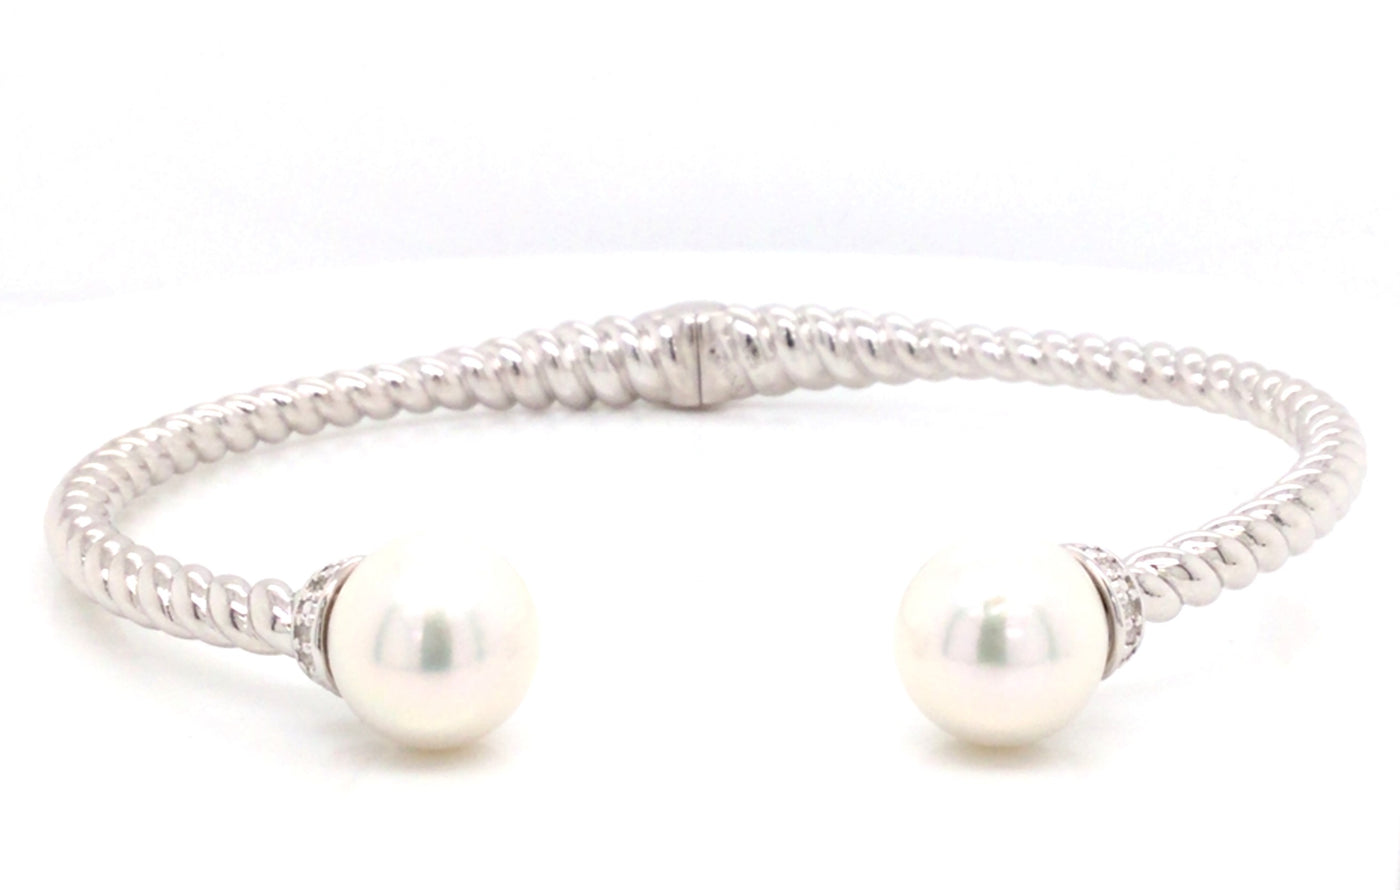 7 inch 10-11 mm Fresh Water Pearl and White Topaz Sterling Silver Hinged Bangle Bracelet